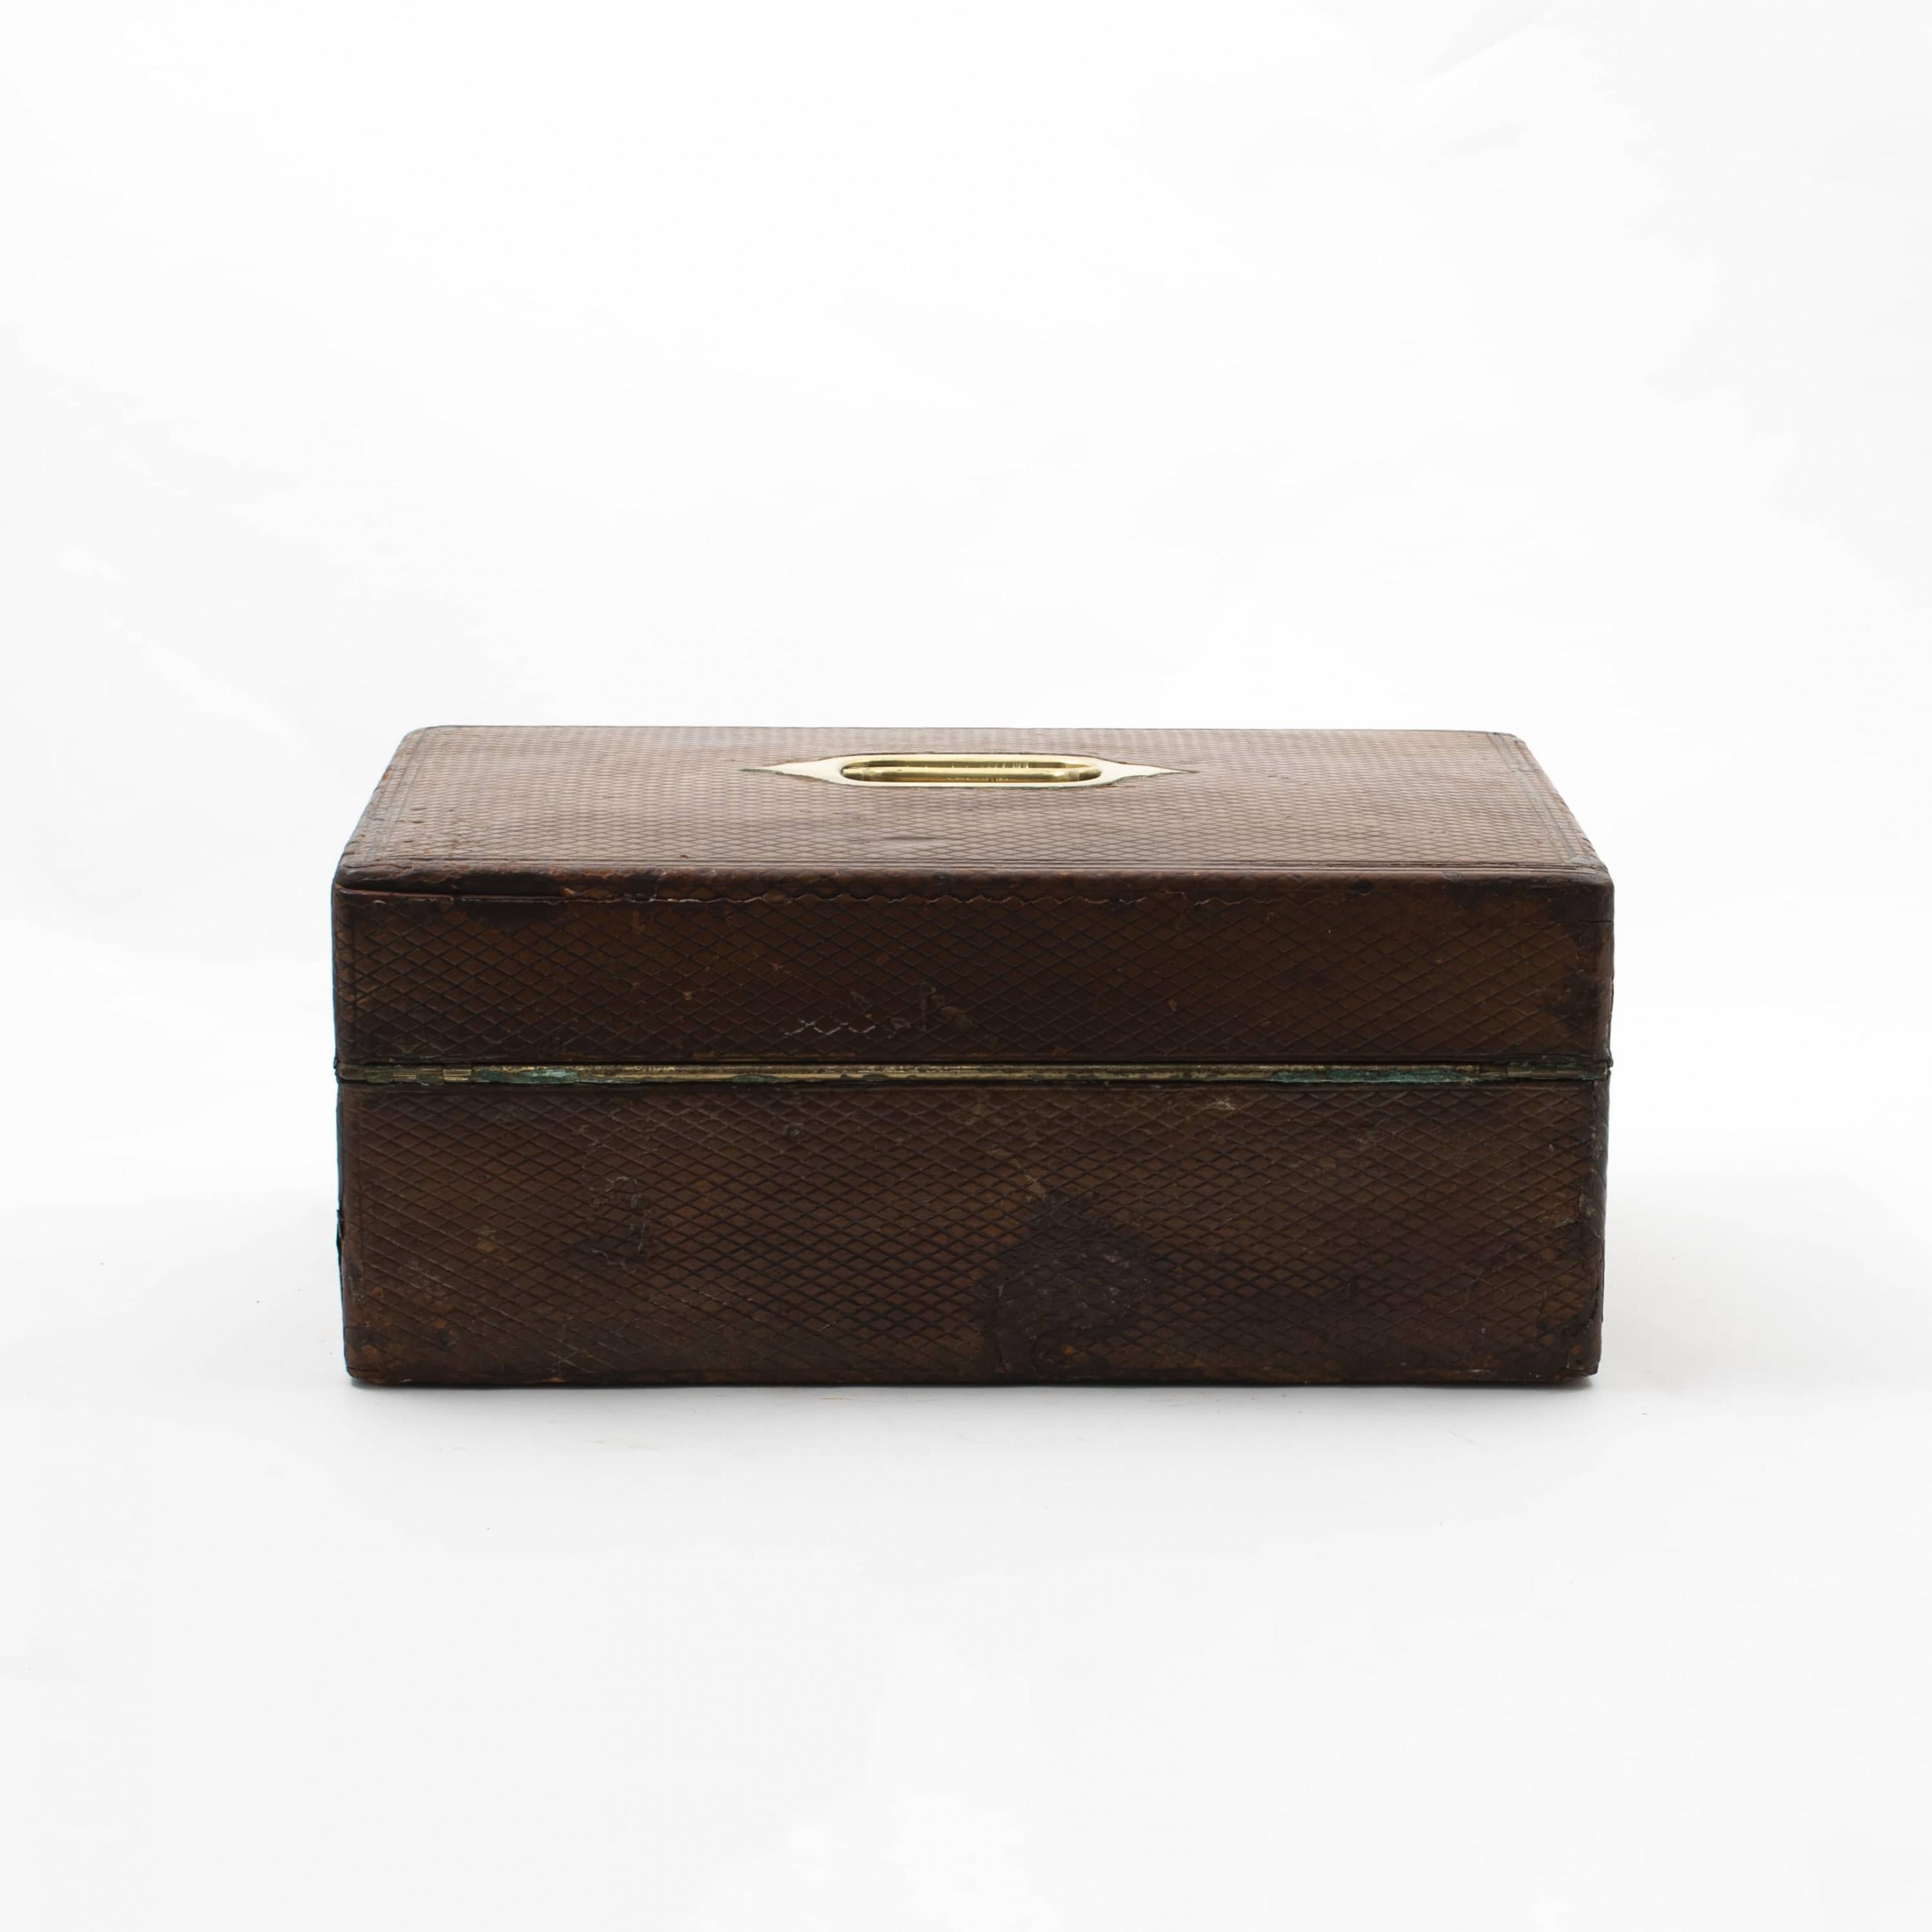 19th Century English Regency Traveling Writing Slope Box or Nécessaire De Voyage 1810-1820